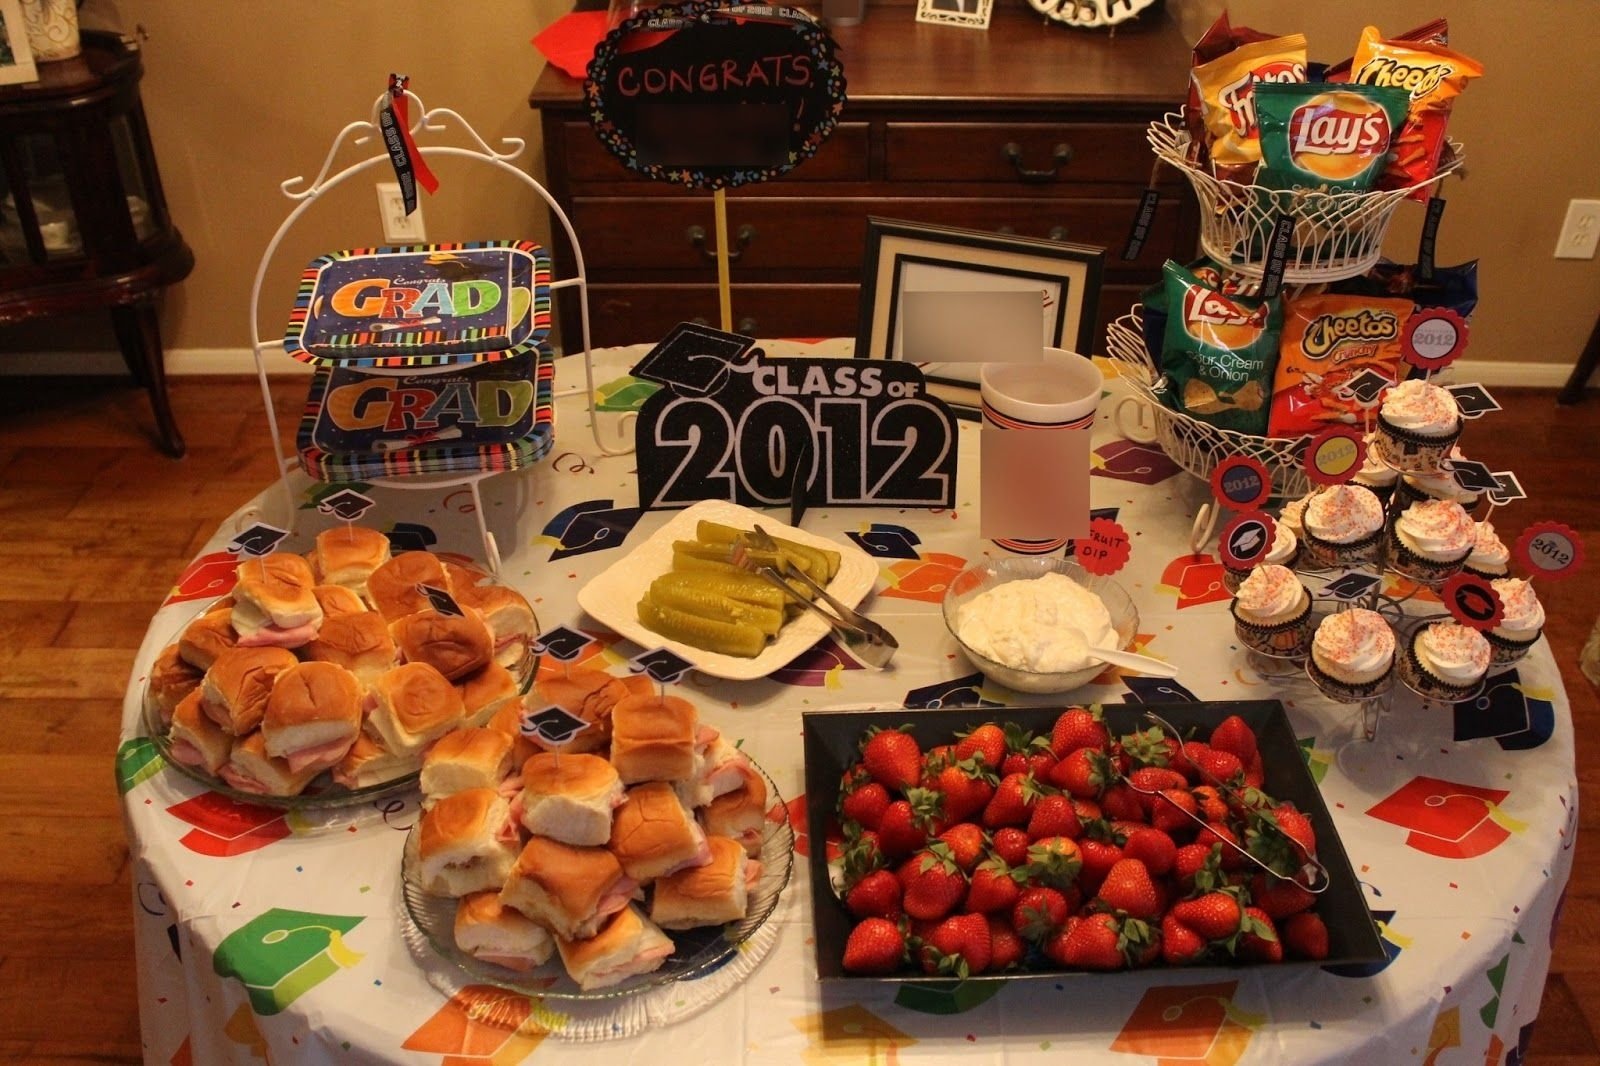 10 Spectacular Food Ideas For Graduation Open House graduation decoration ideas this is just a simple banner i 6 2023